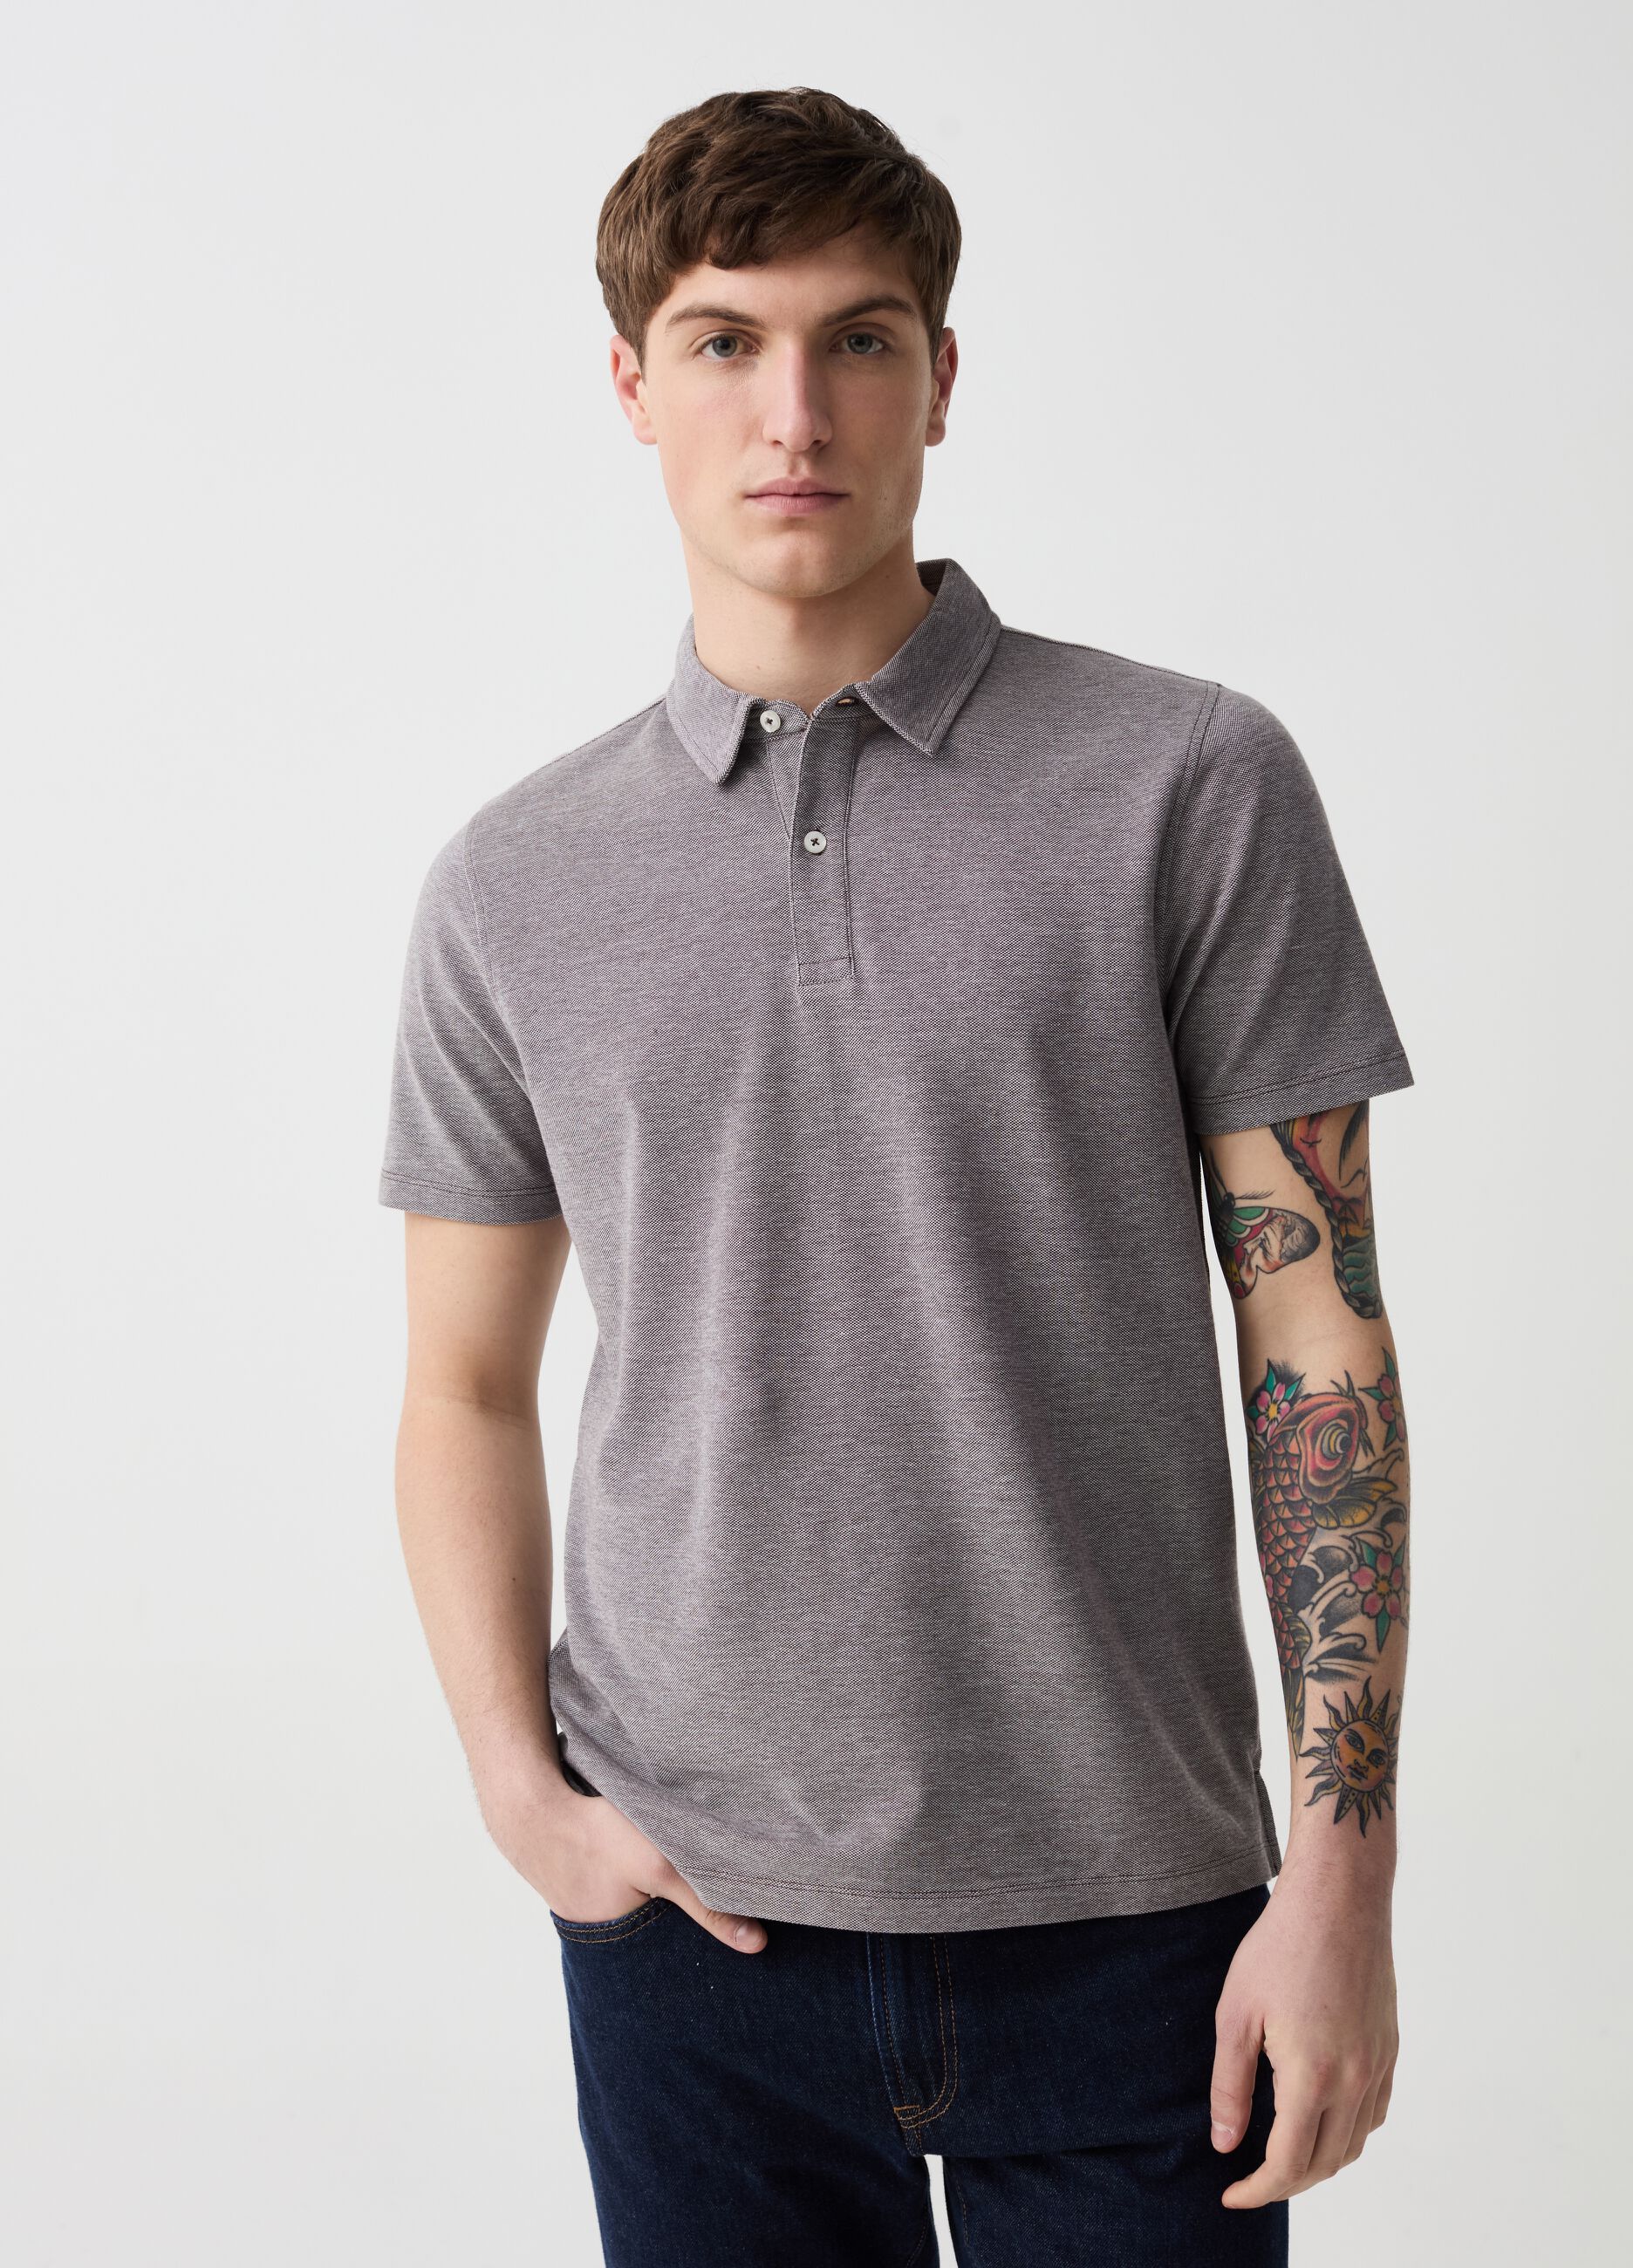 Piquet polo shirt with two-tone jacquard weave